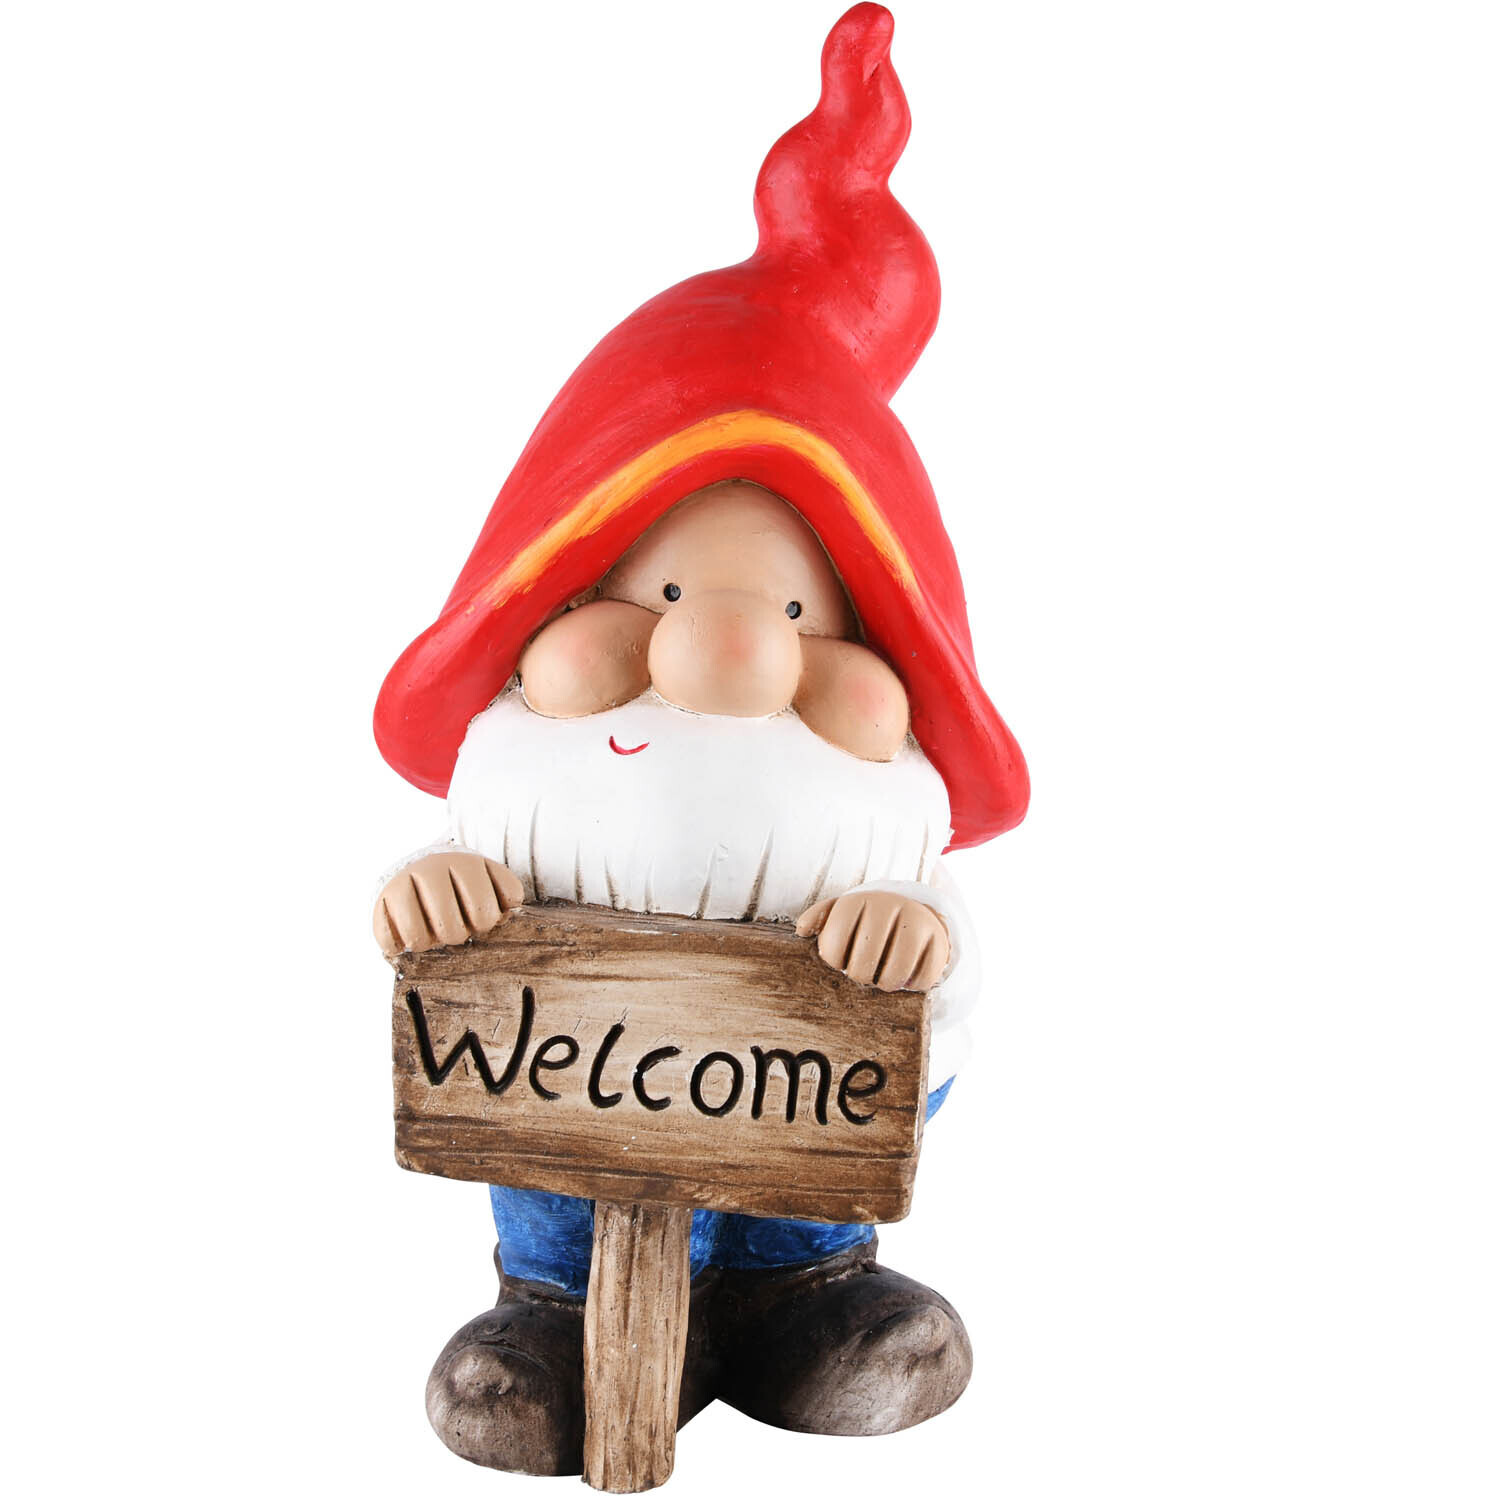 Tuinkabouter met bord 'Welcome'